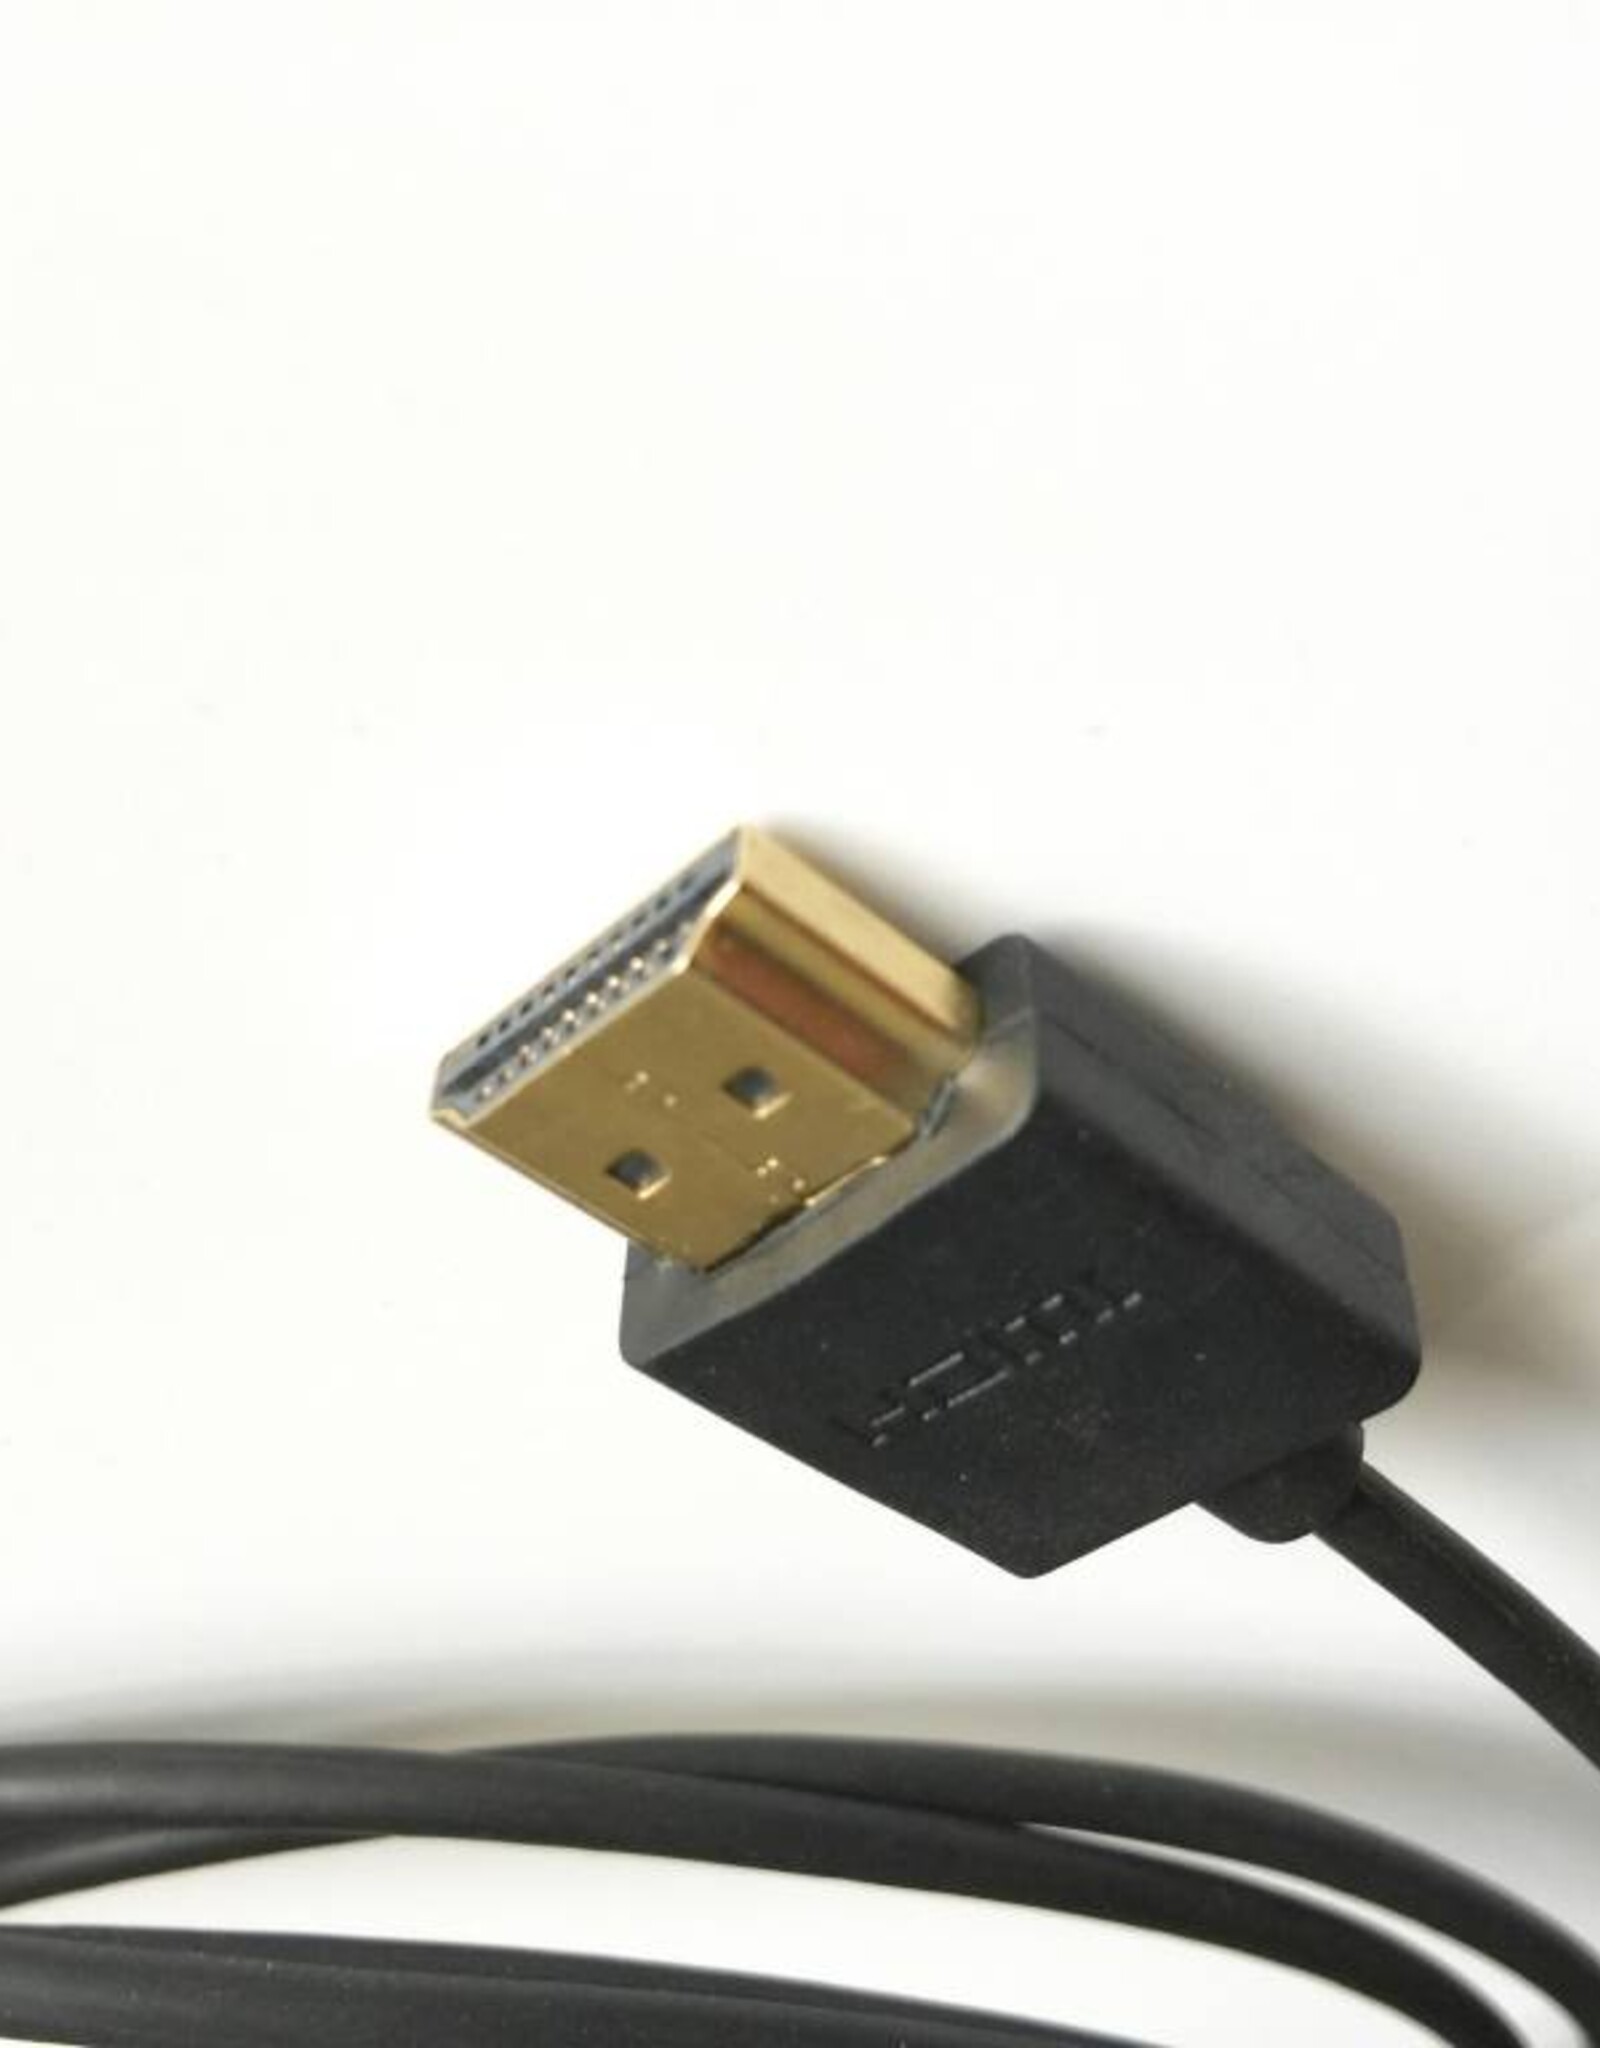 DroneLand HDMI to HDMI - high res. - Thin cable - 1,5 meter - for use with DJI Ronin and Ronin-M- droneland.nl